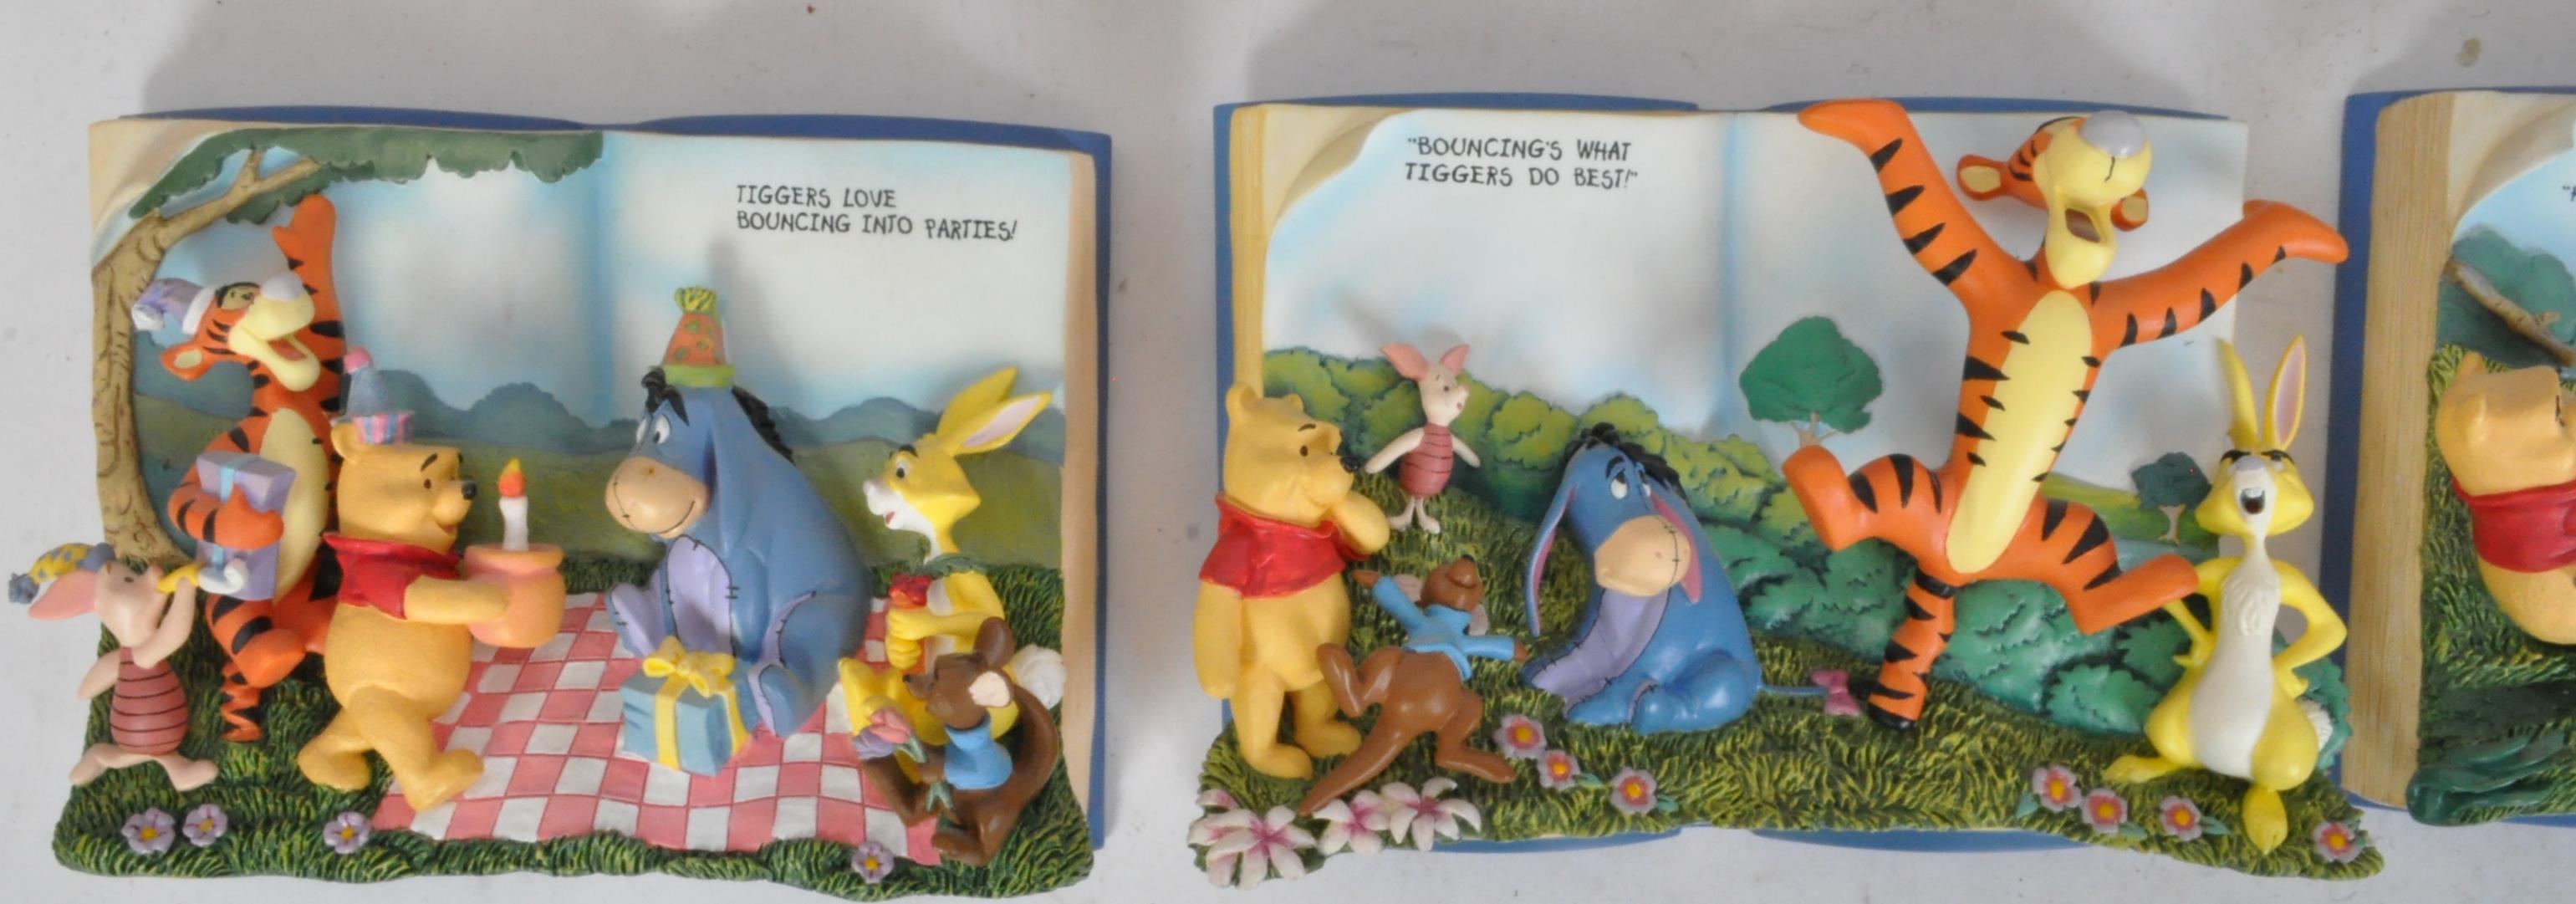 COLLECTION BRADFORD EXCHANGE WINNIE THE POOH STORYBOOK PLAQUES - Image 6 of 10